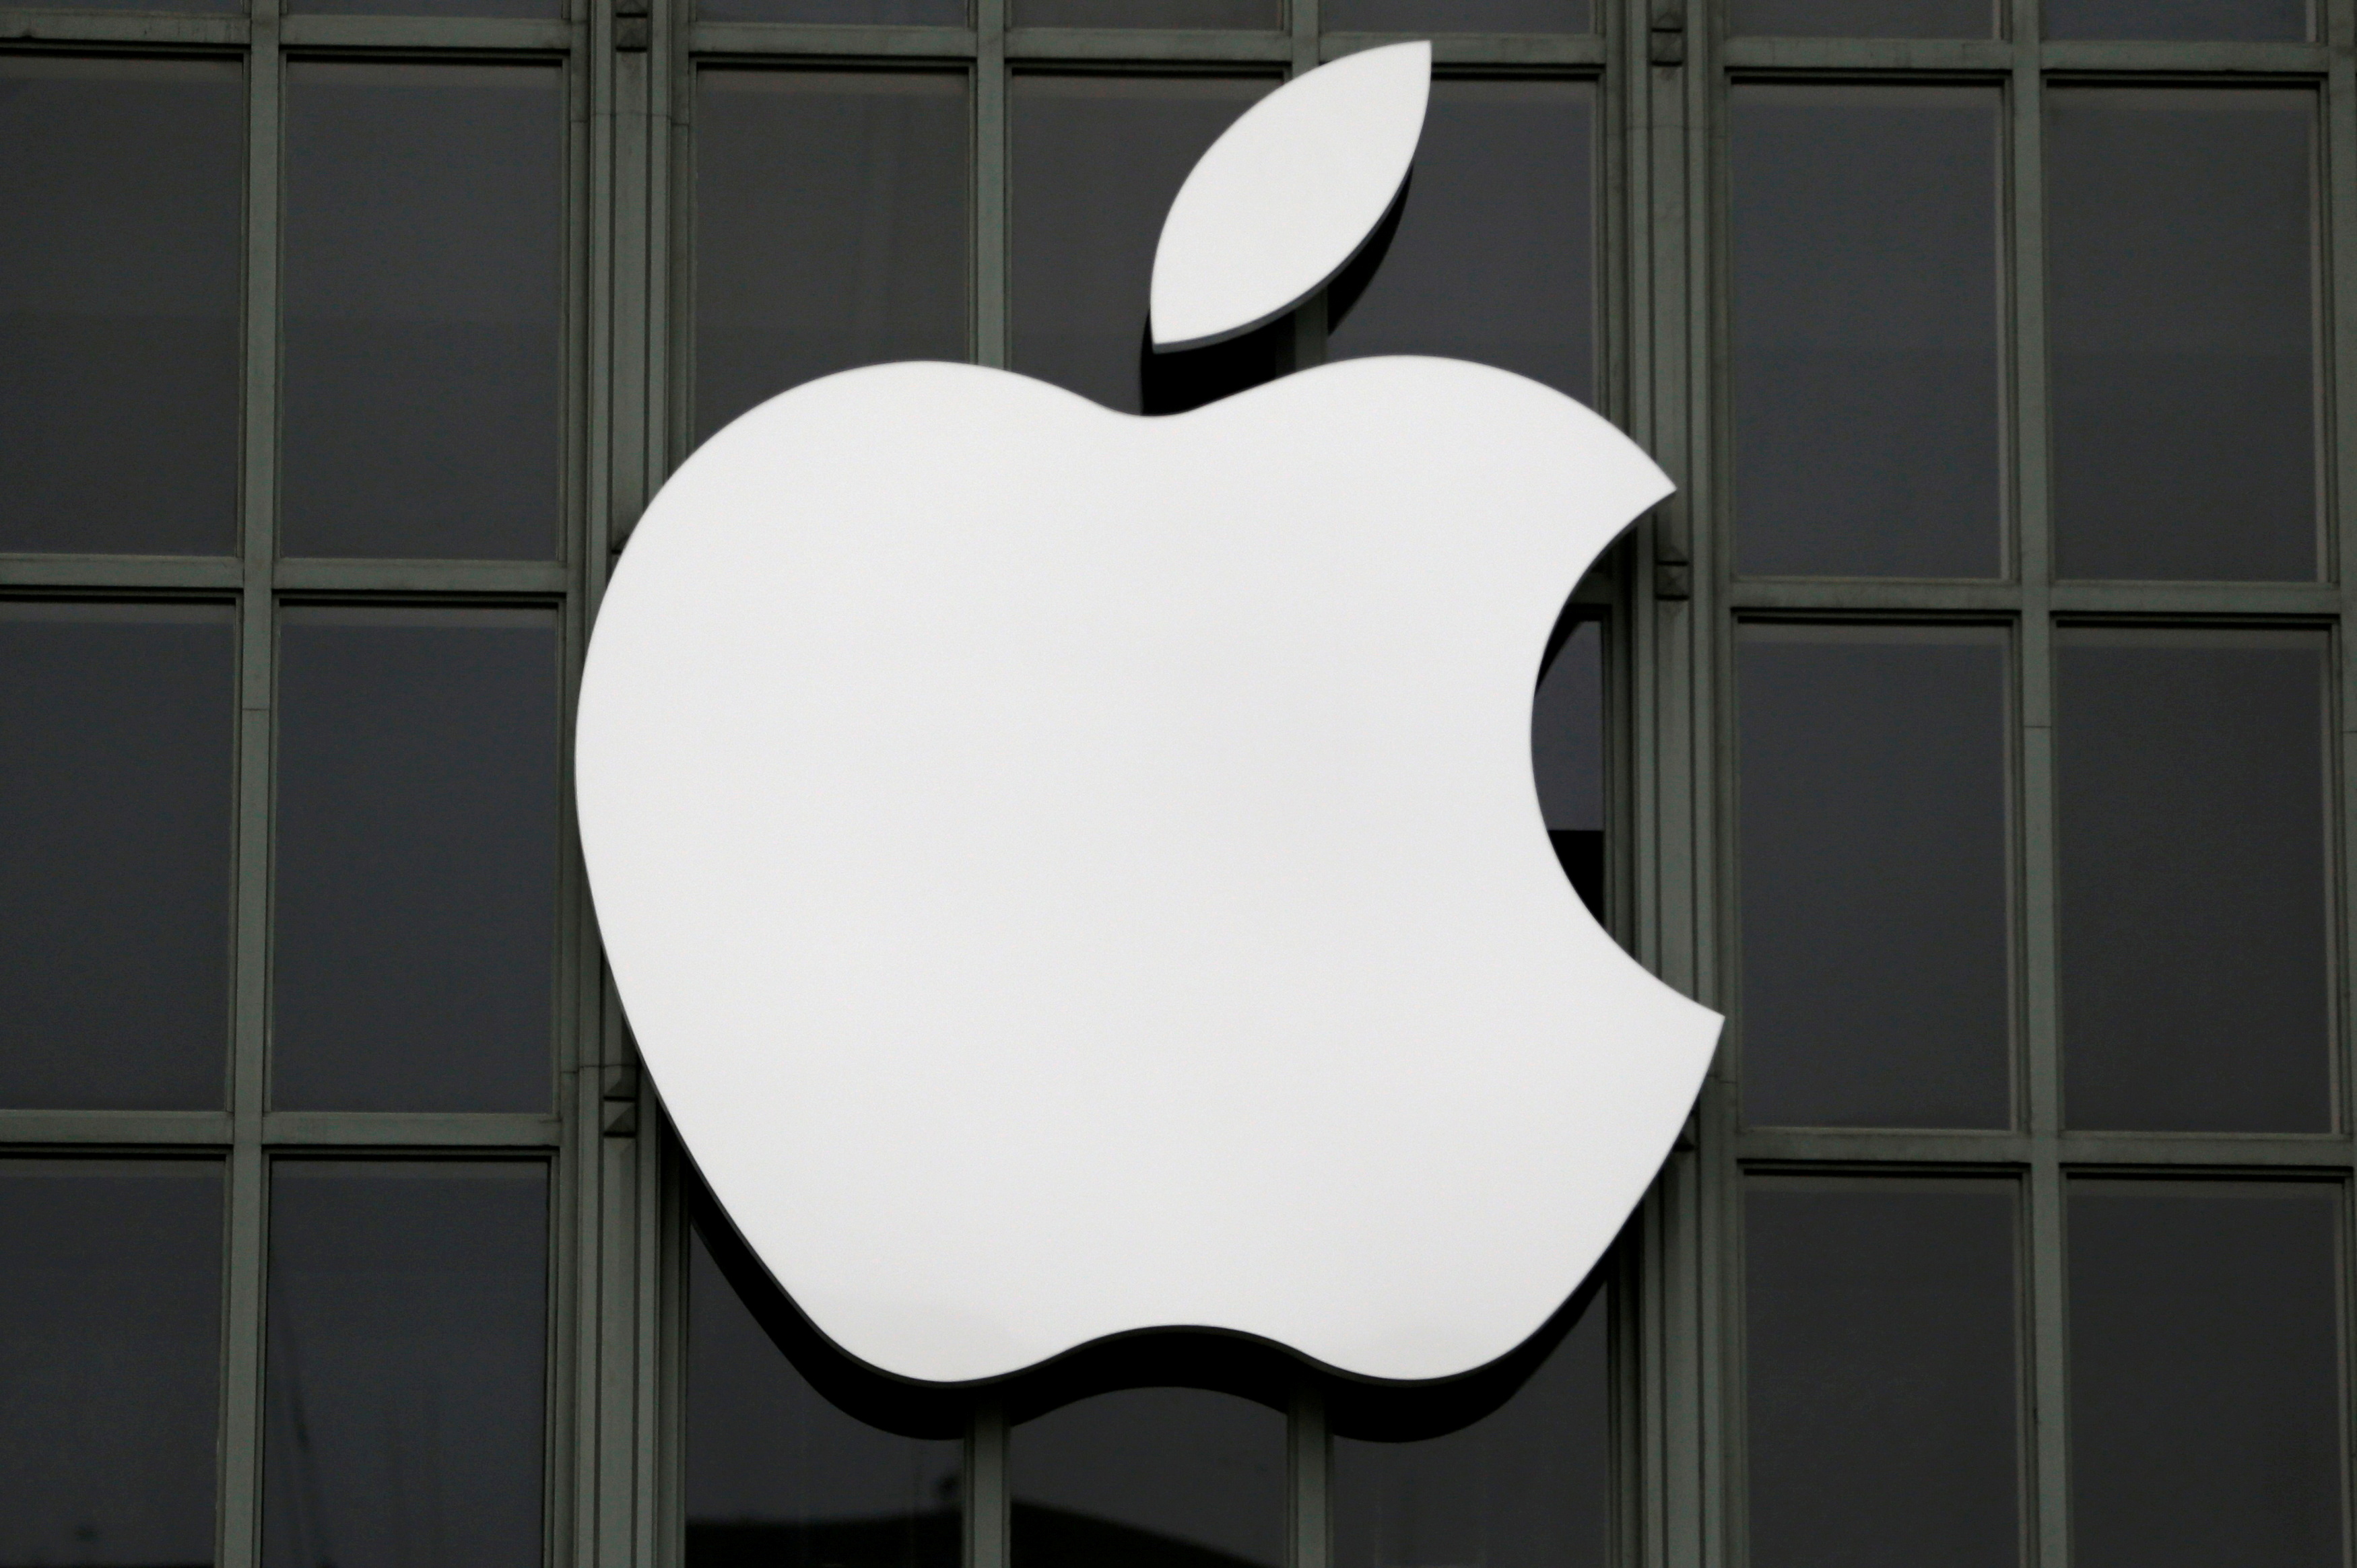  The Apple Inc logo is shown outside the company's 2016 Worldwide Developers Conference in San Francisco, California, U.S. June 13, 2016. REUTERS/Stephen Lam/File Photo